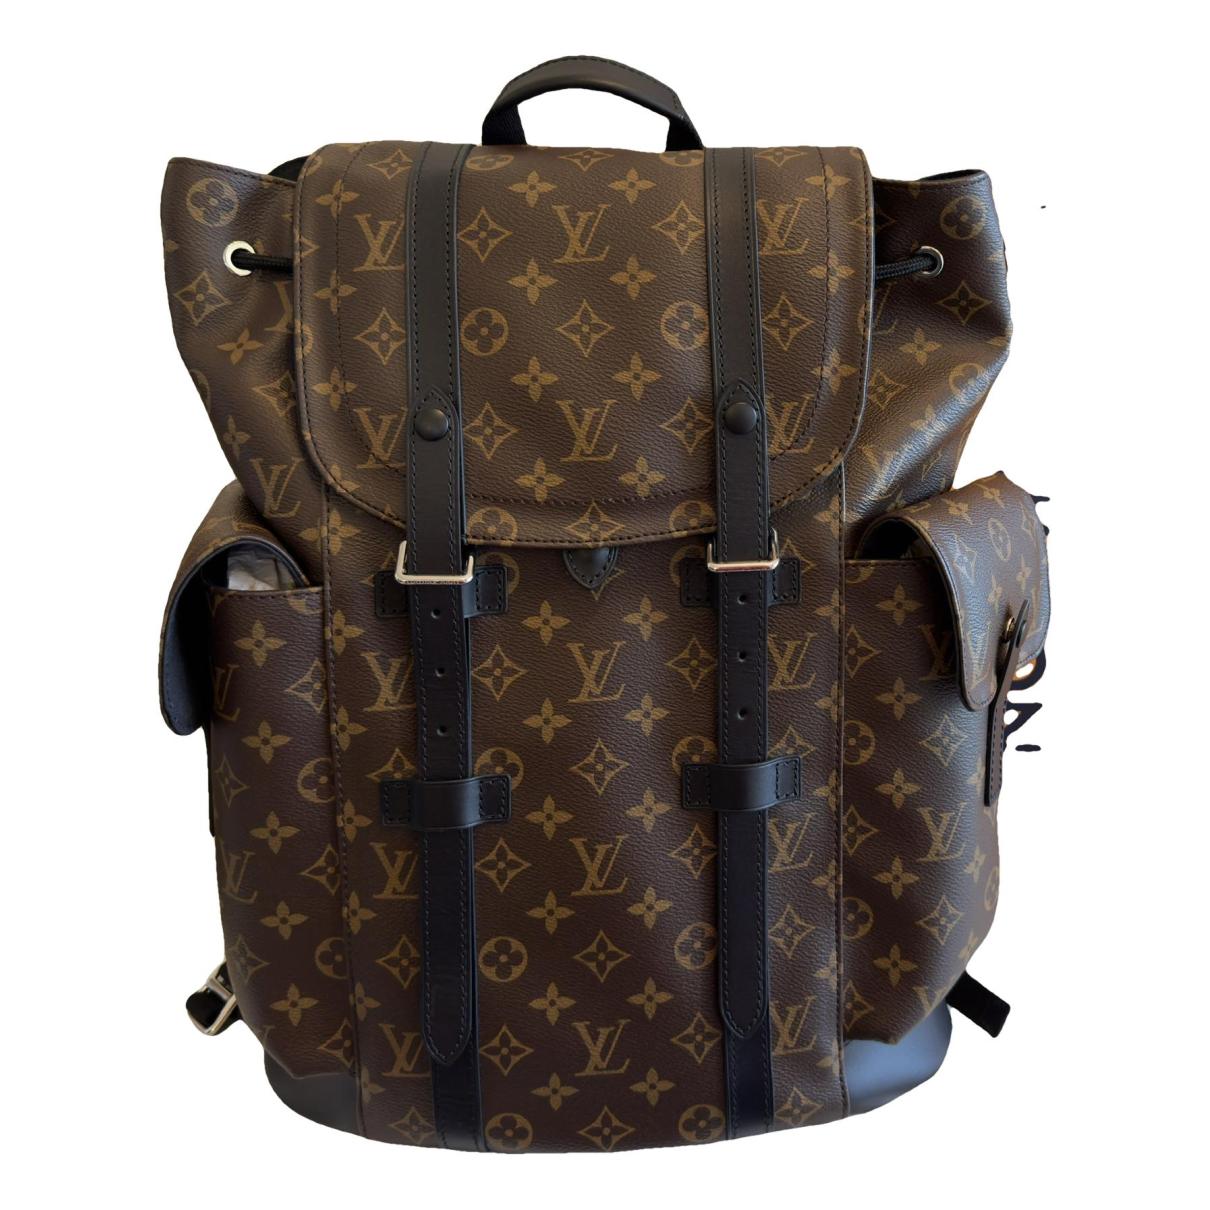 Louis Vuitton Monogram Macassar Christopher Backpack PM - Handbag | Pre-owned & Certified | used Second Hand | Unisex